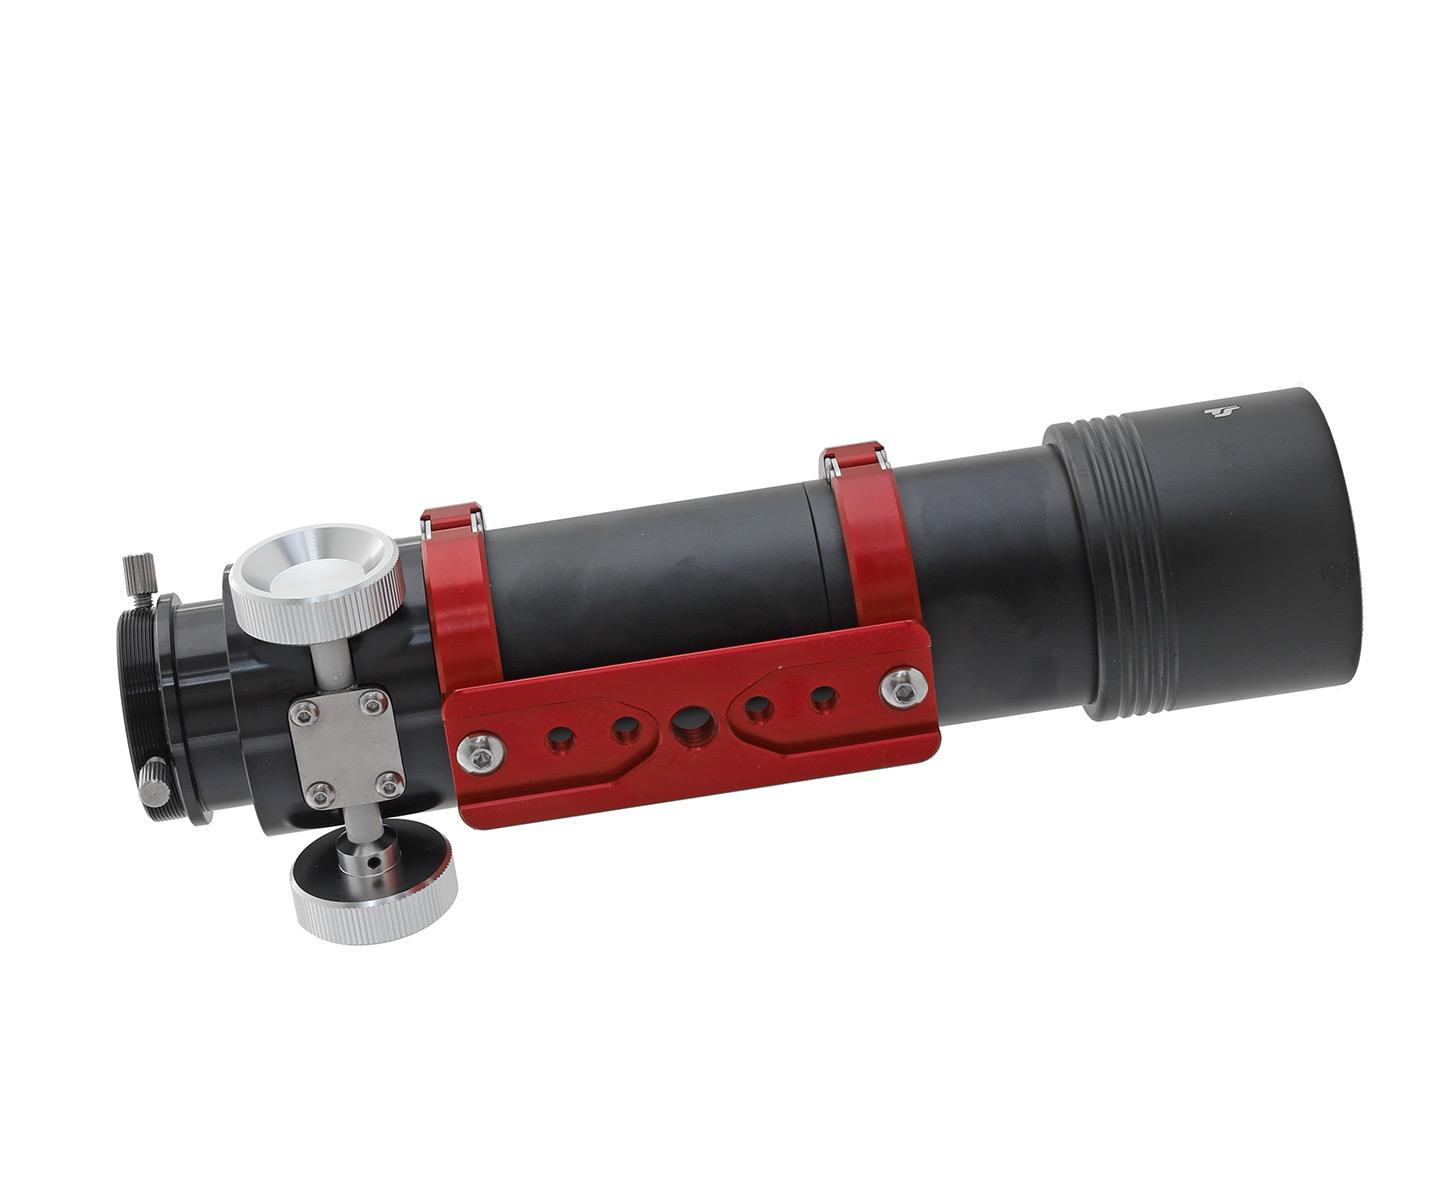  The fast 50 mm refractor with the improved ED 50 mm objective can be used as a travel telescope, spotting scope and guiding scope [EN] 